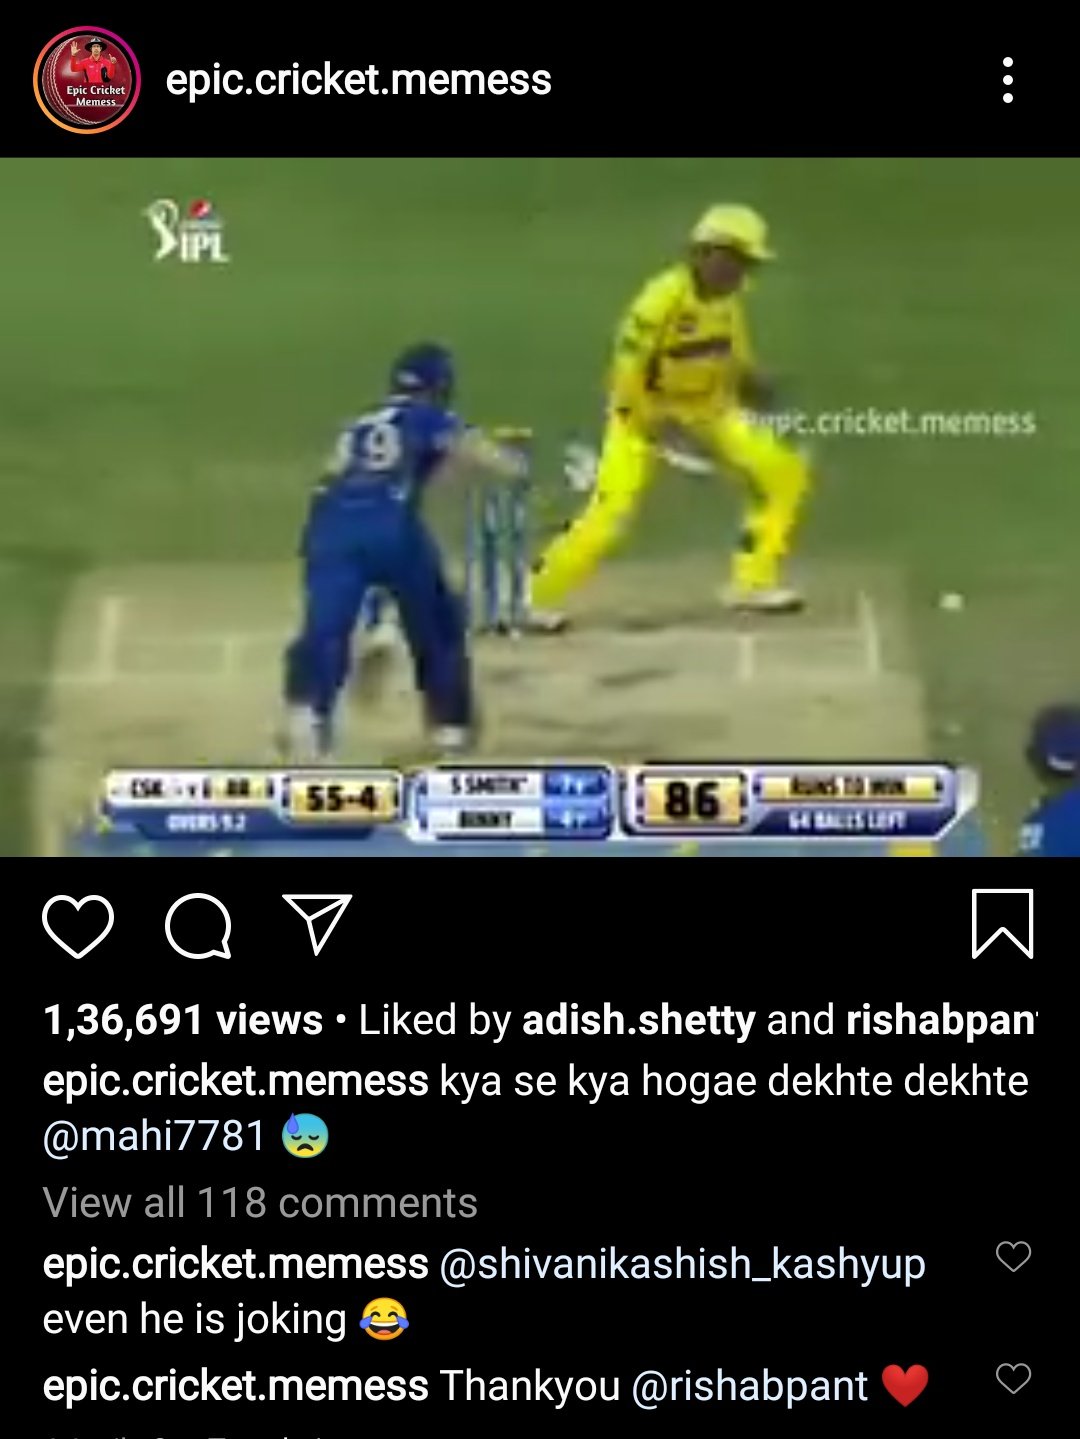 The troll post by a fanpage on Instagram mocking MS Dhoni 